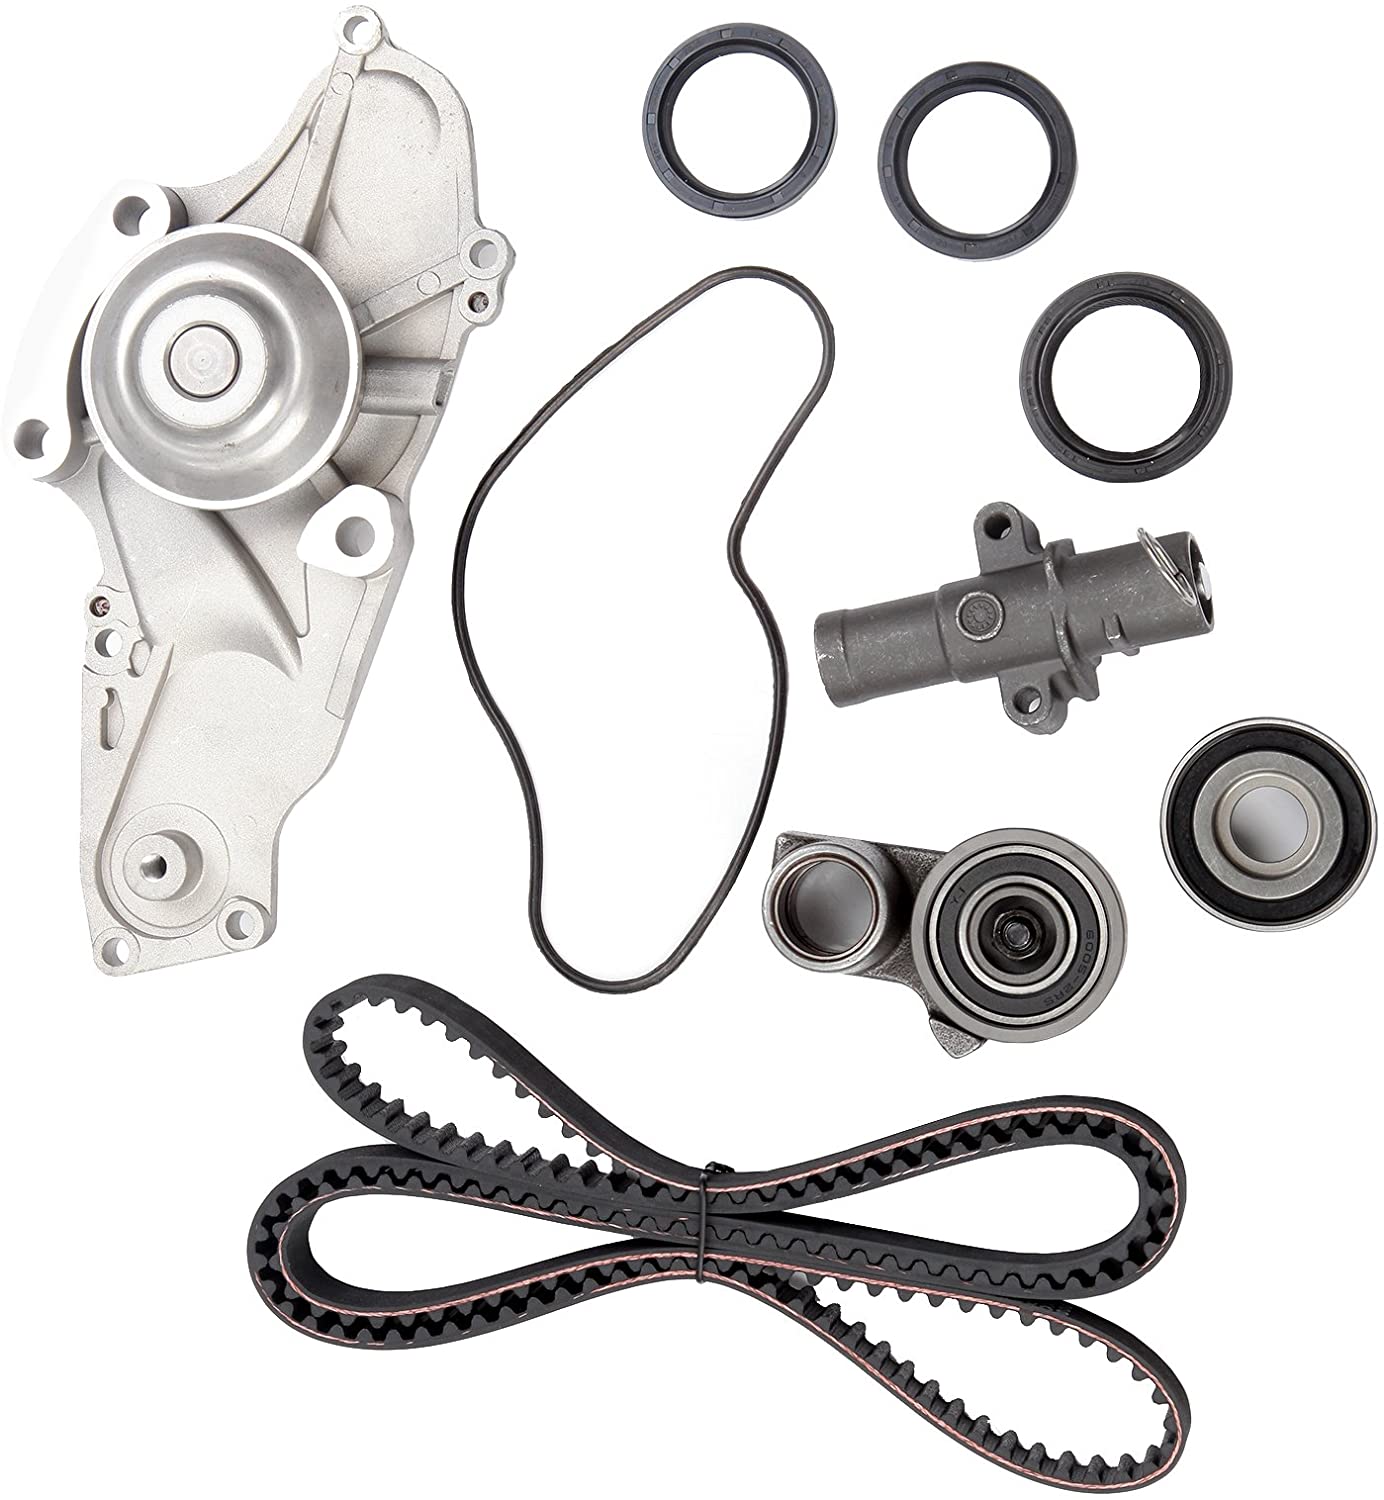 OCPTY Timing Belt Kit Including Timing Belt Water Pump with Gasket